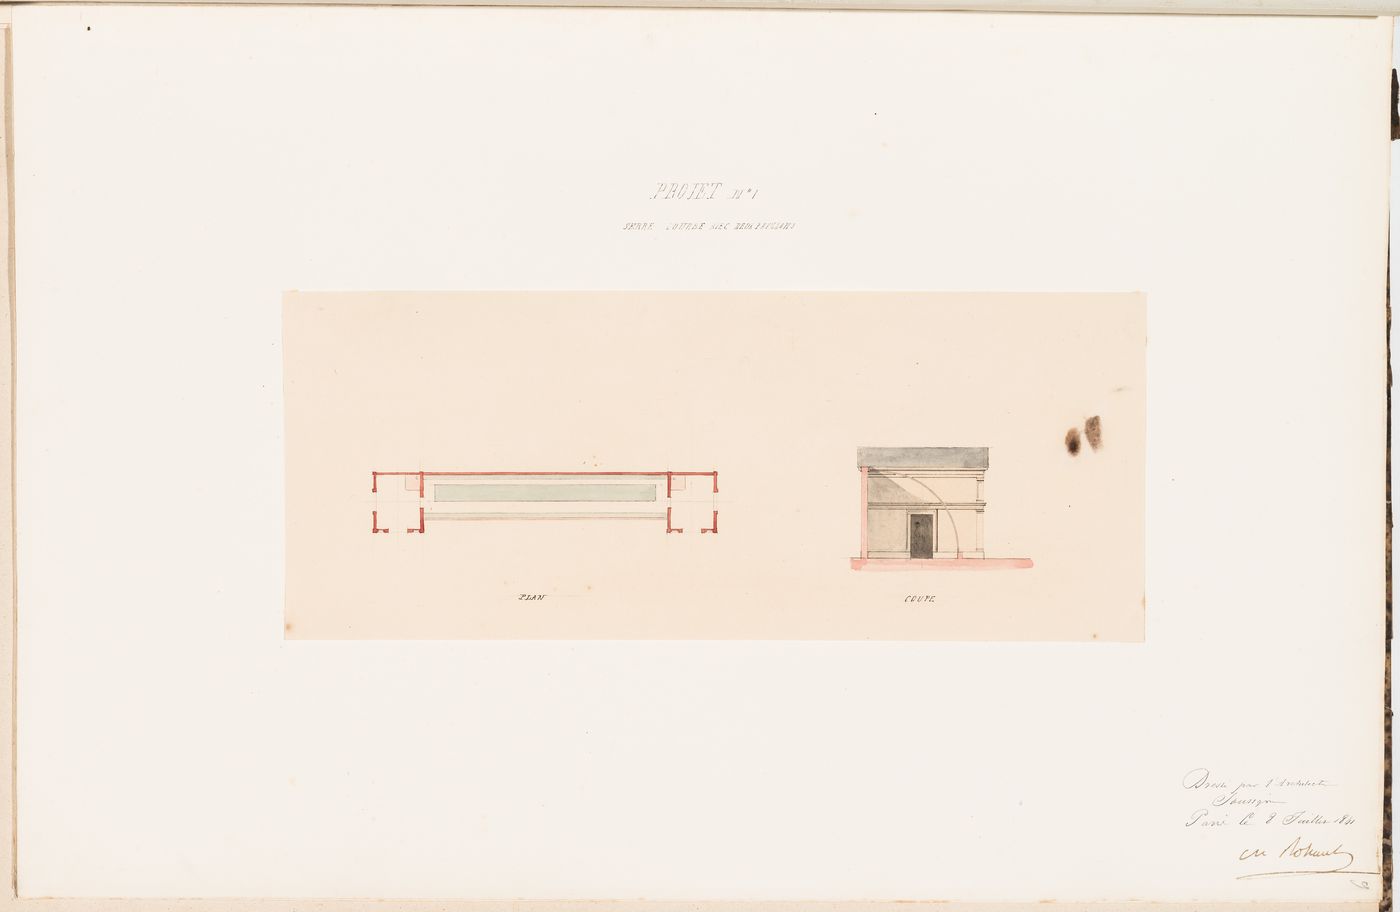 Plan and cross section for a "serre chaude" with a curved glass roof and two pavilions for Monsieur Fauquet-Lemaitre